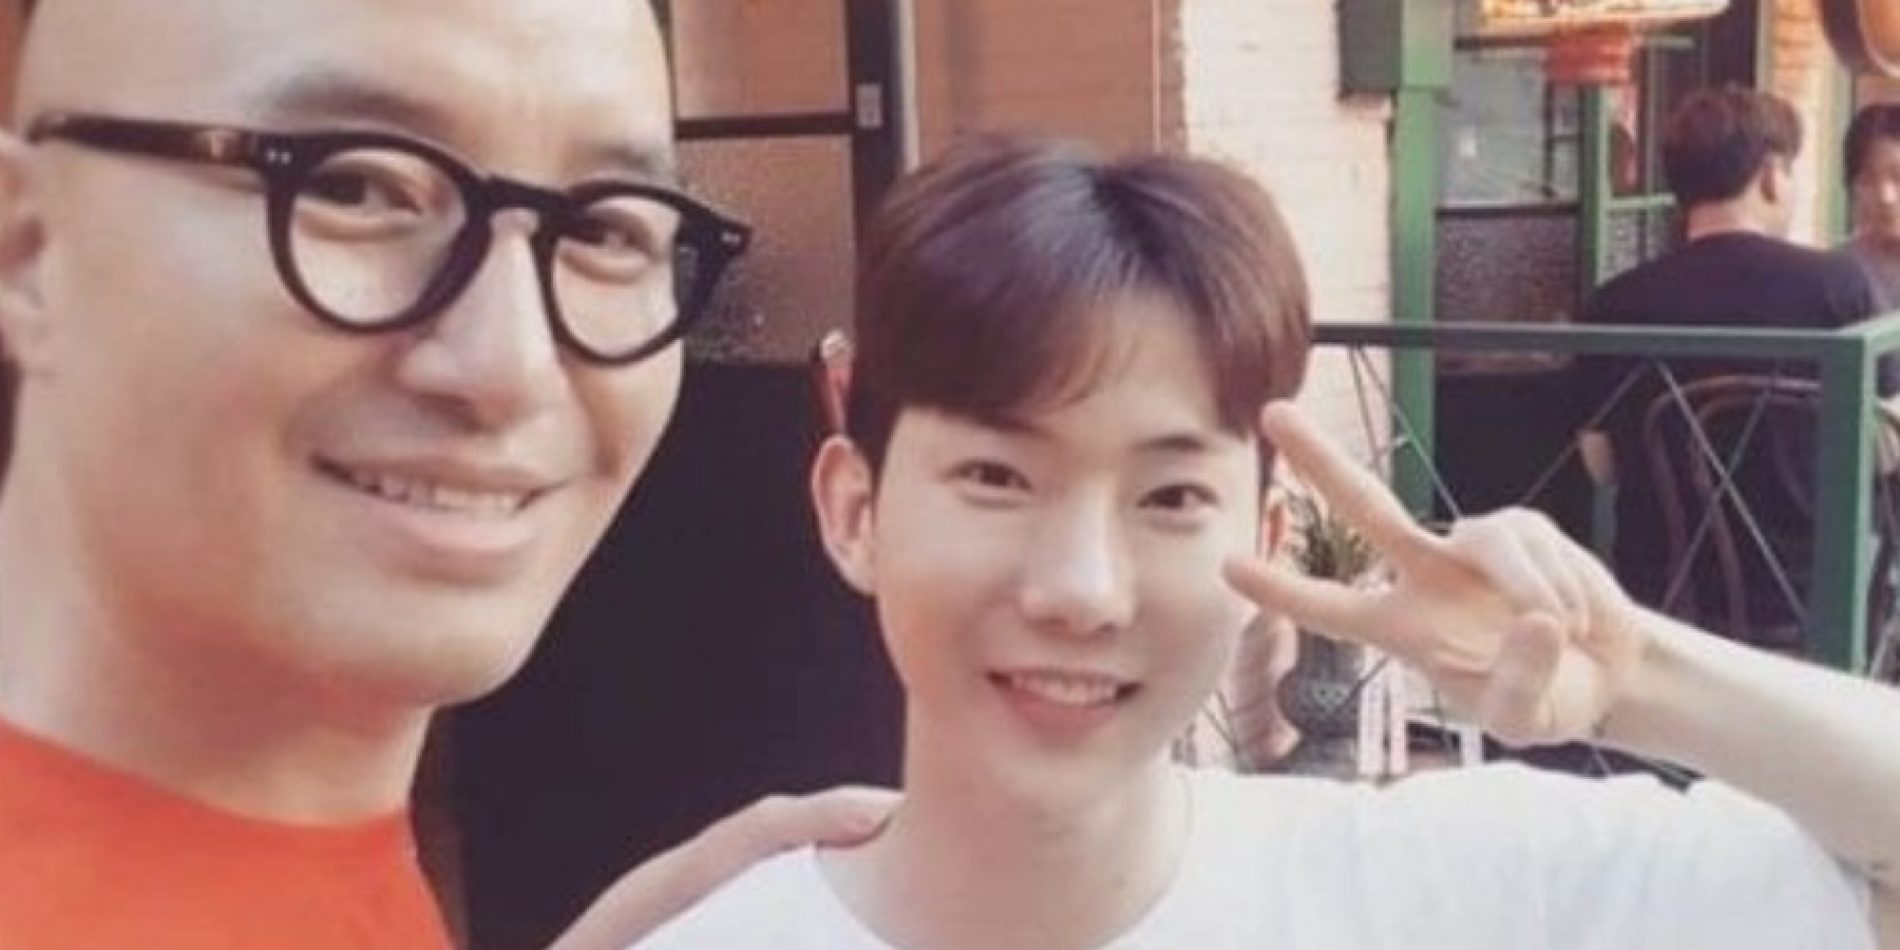 “Don’t Change My Feed Full Of Rainbows To Dark Clouds.” K-Pop star Jo Kwon slams homophobic trolls over photo with gay chef